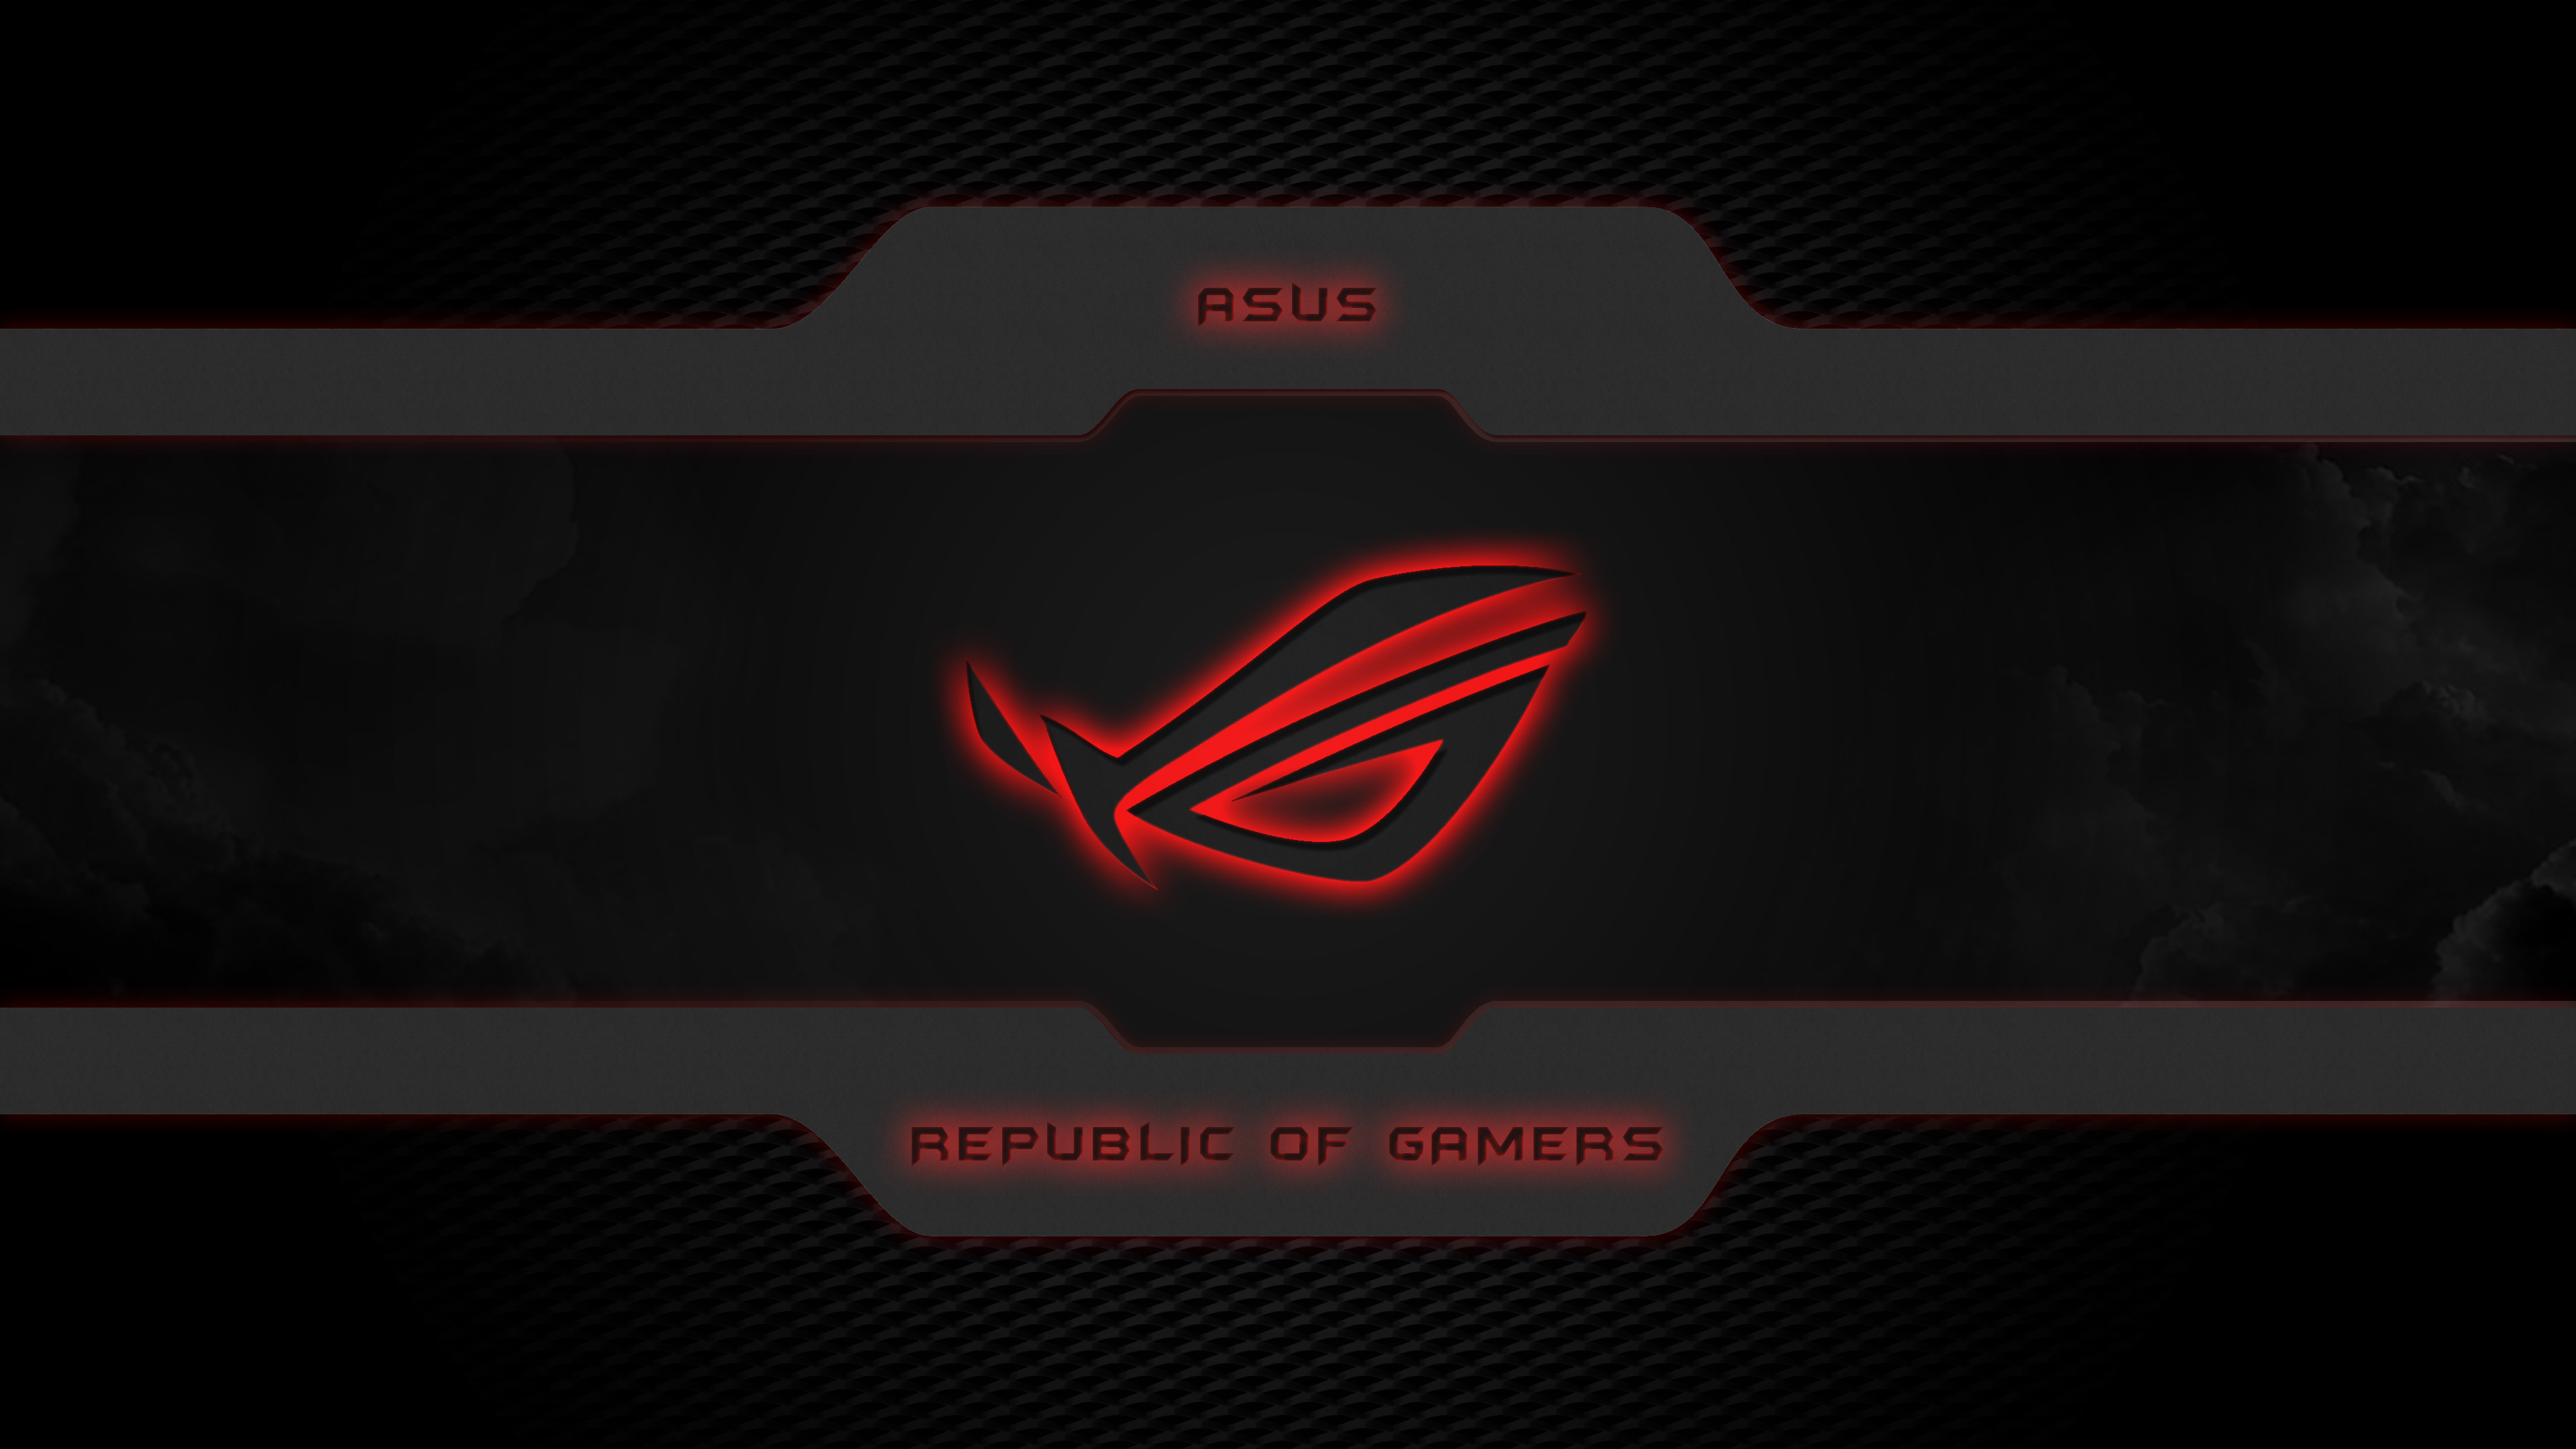 3840x2160 Widescreen Wallpapers of ASUS, Newest Background